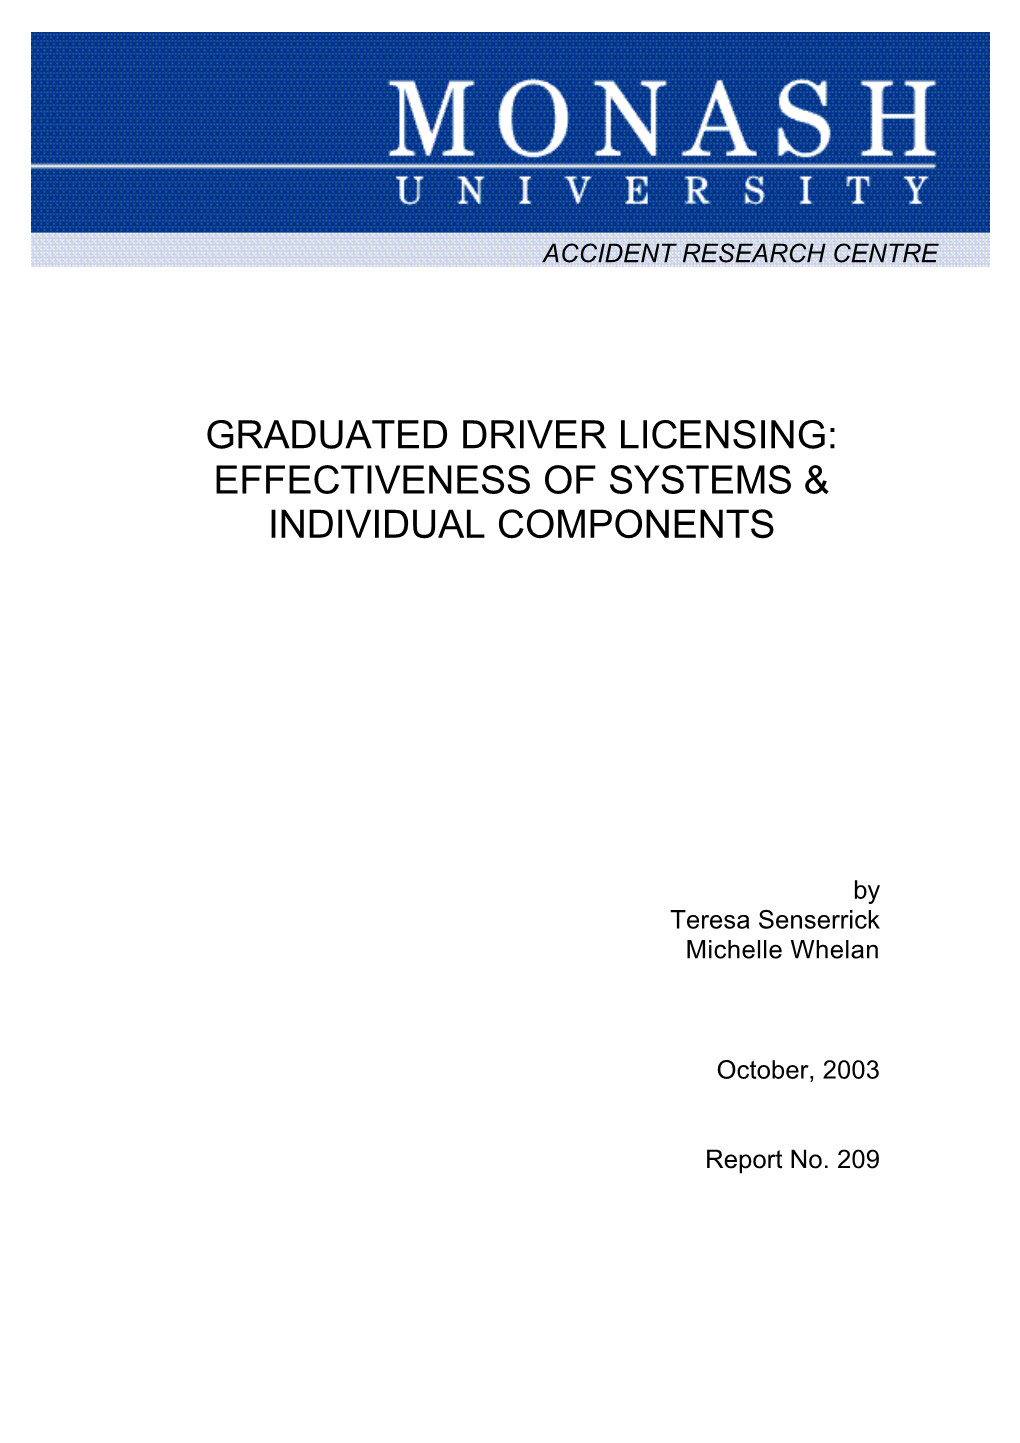 Graduated Driver Licensing: Effectiveness of Systems & Individual Components